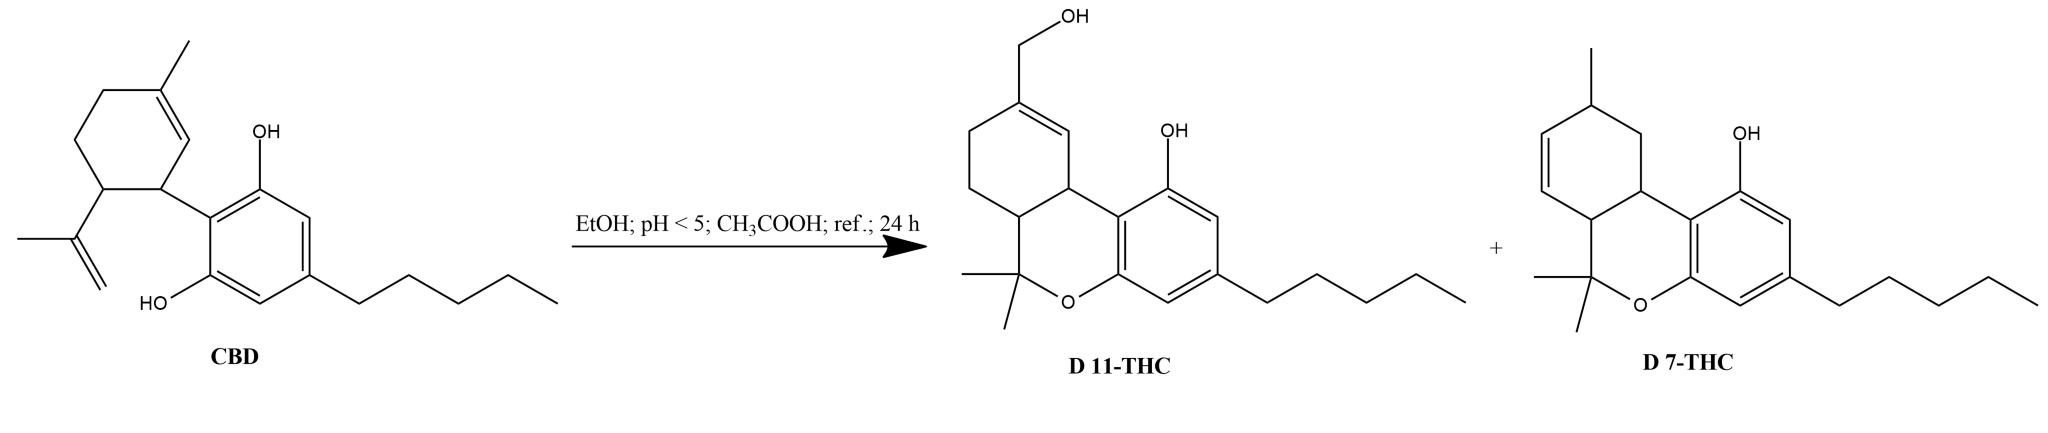 Isomerization of cannabidiol With vinegar.png